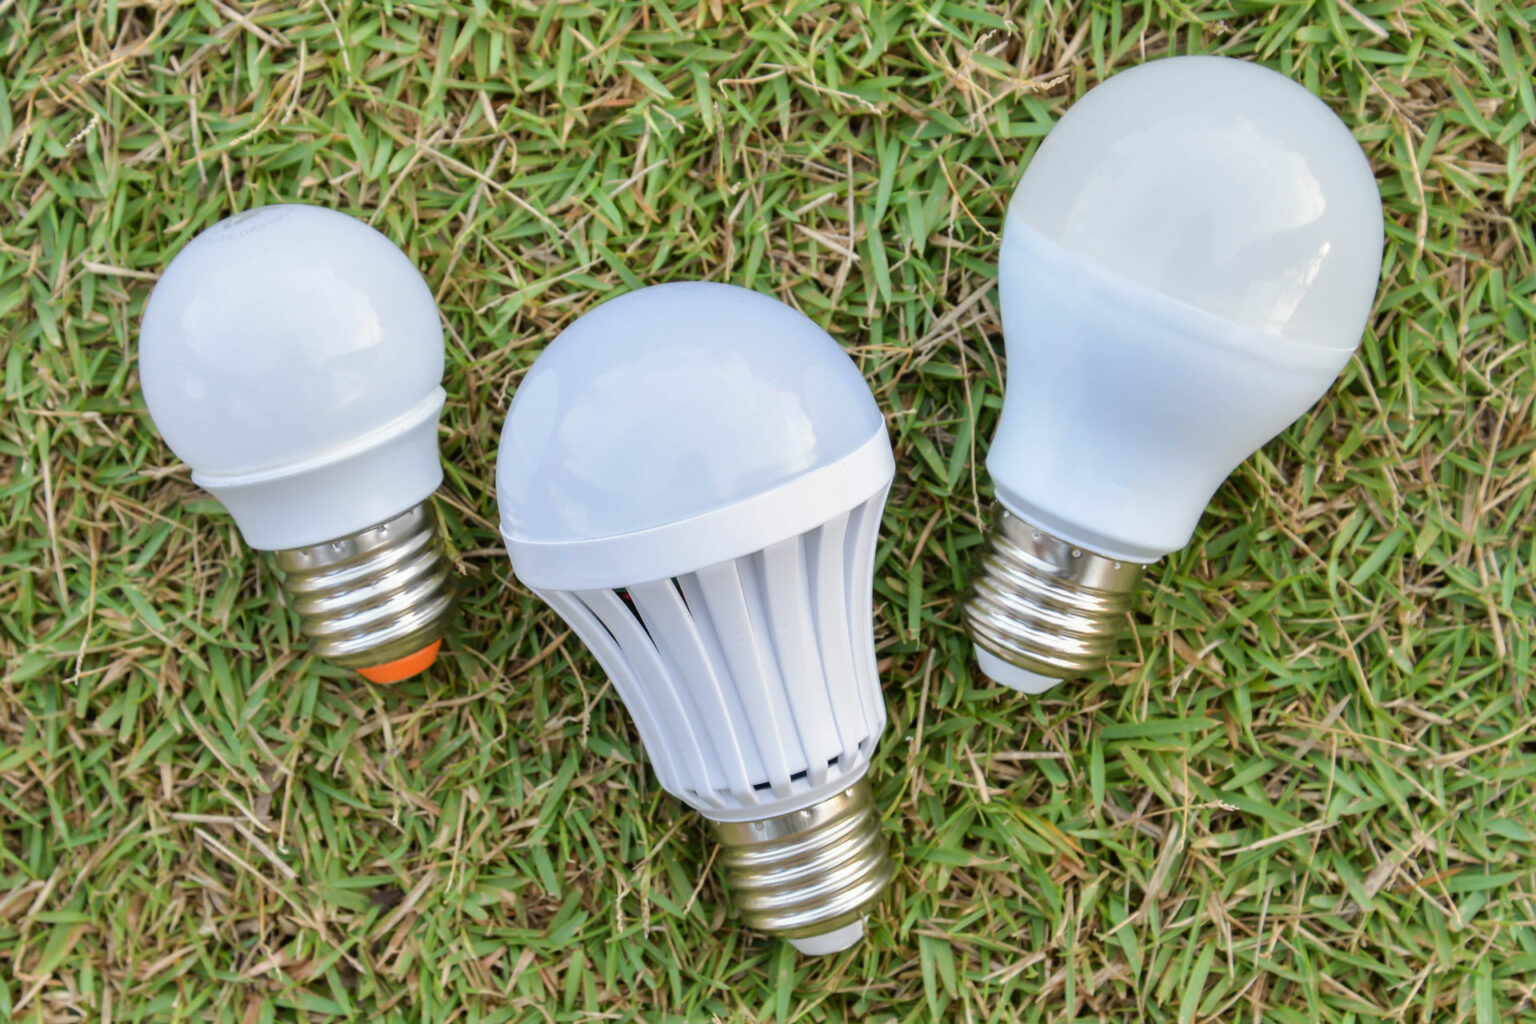 A19 vs A21 Bulb: What’s The Difference? - LampHQ